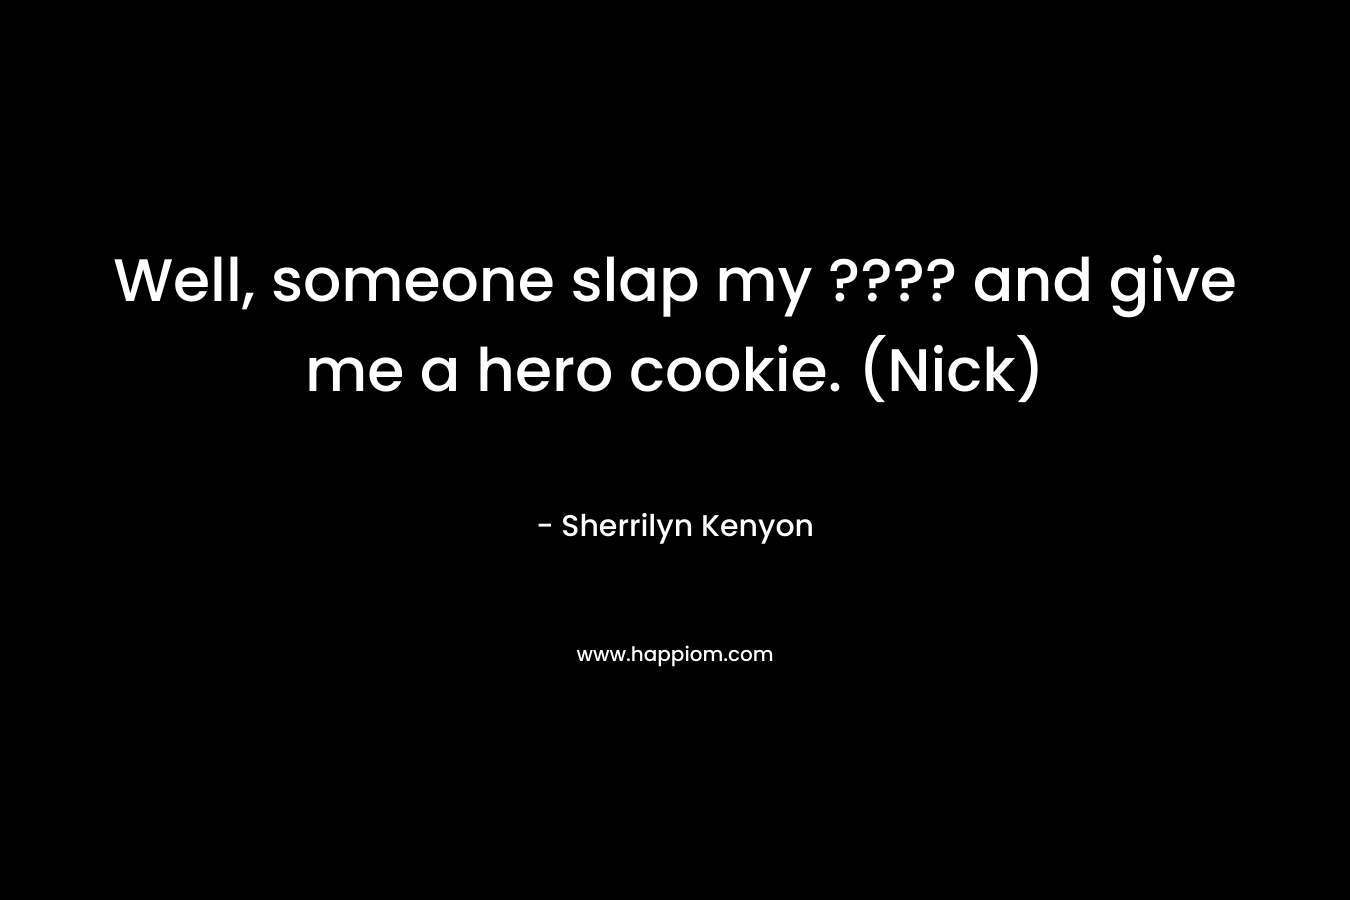 Well, someone slap my ???? and give me a hero cookie. (Nick) – Sherrilyn Kenyon